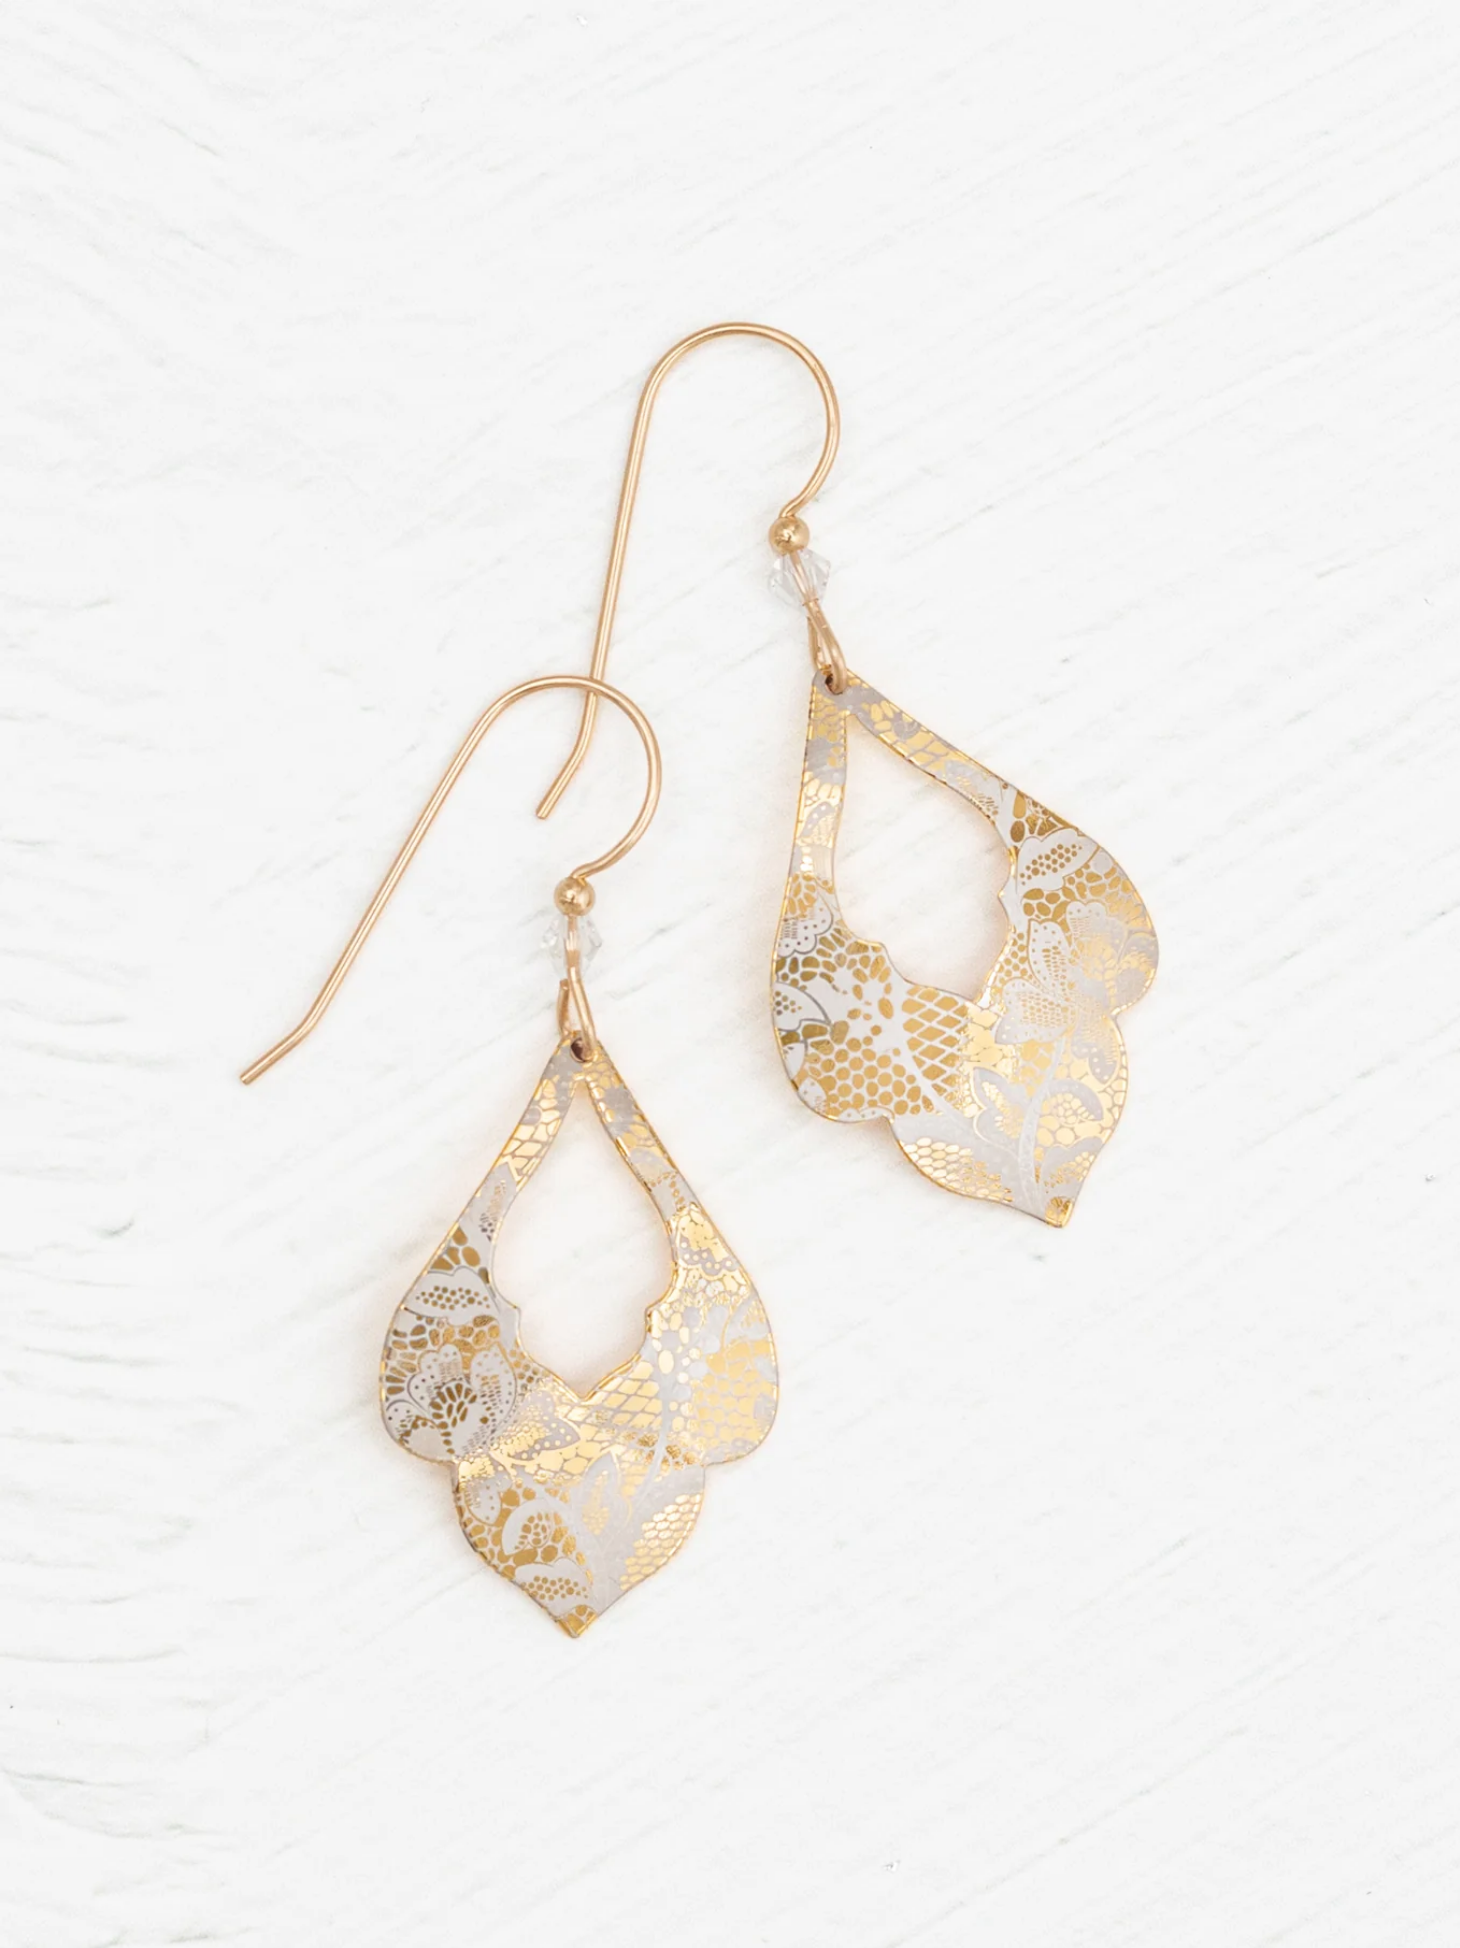 Marisol Earrings in Gold - Heart of the Home LV